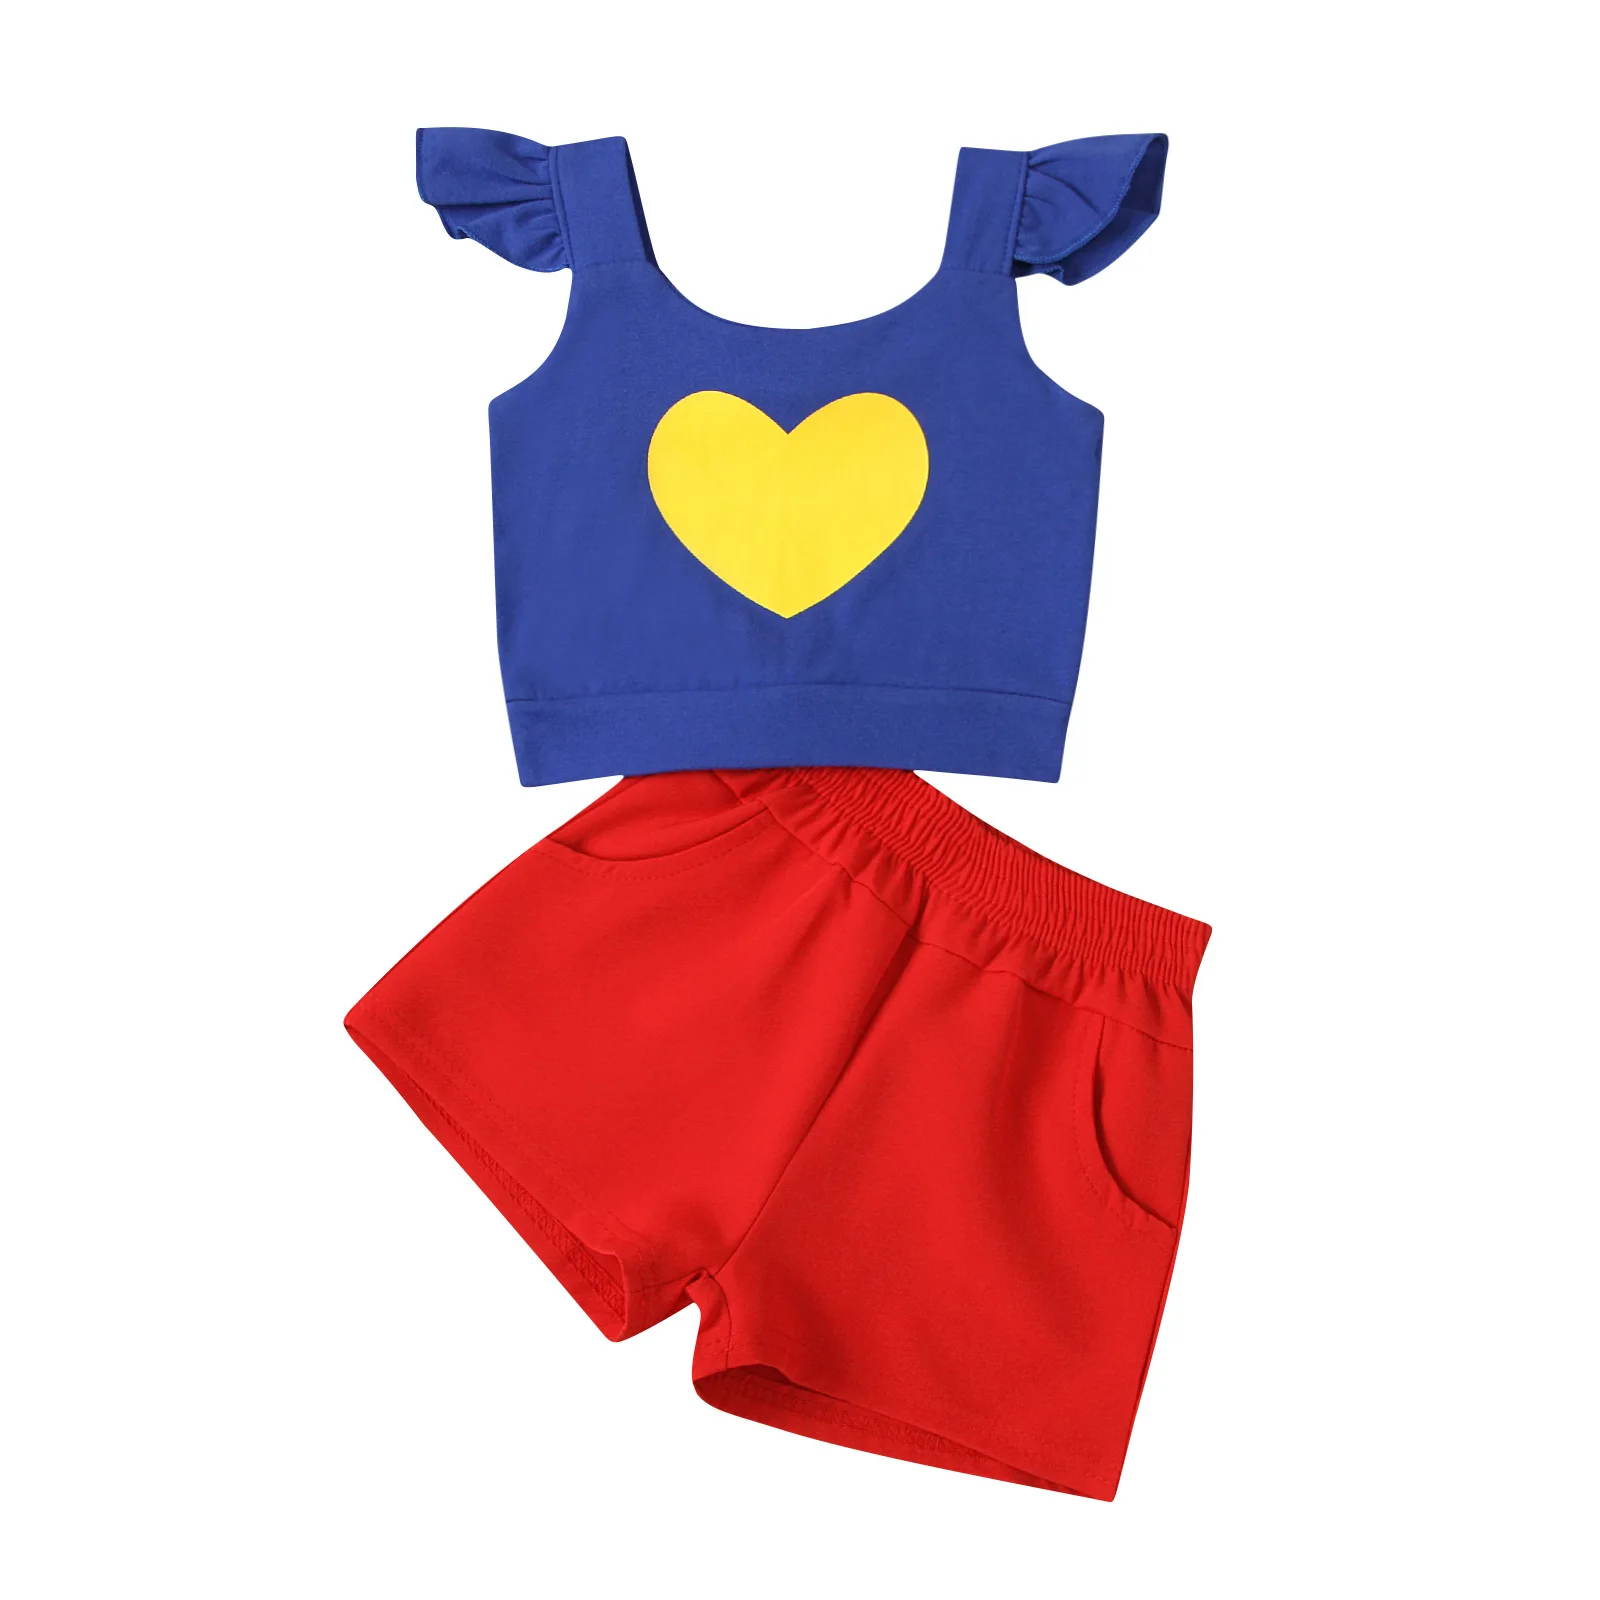 

4111 Kid Toddler Baby Girls Clothing Set Sleeveless Heart Print Suspender Tank Tops+Shorts 2Pcs Outfits Casual Children Clothes, As picture